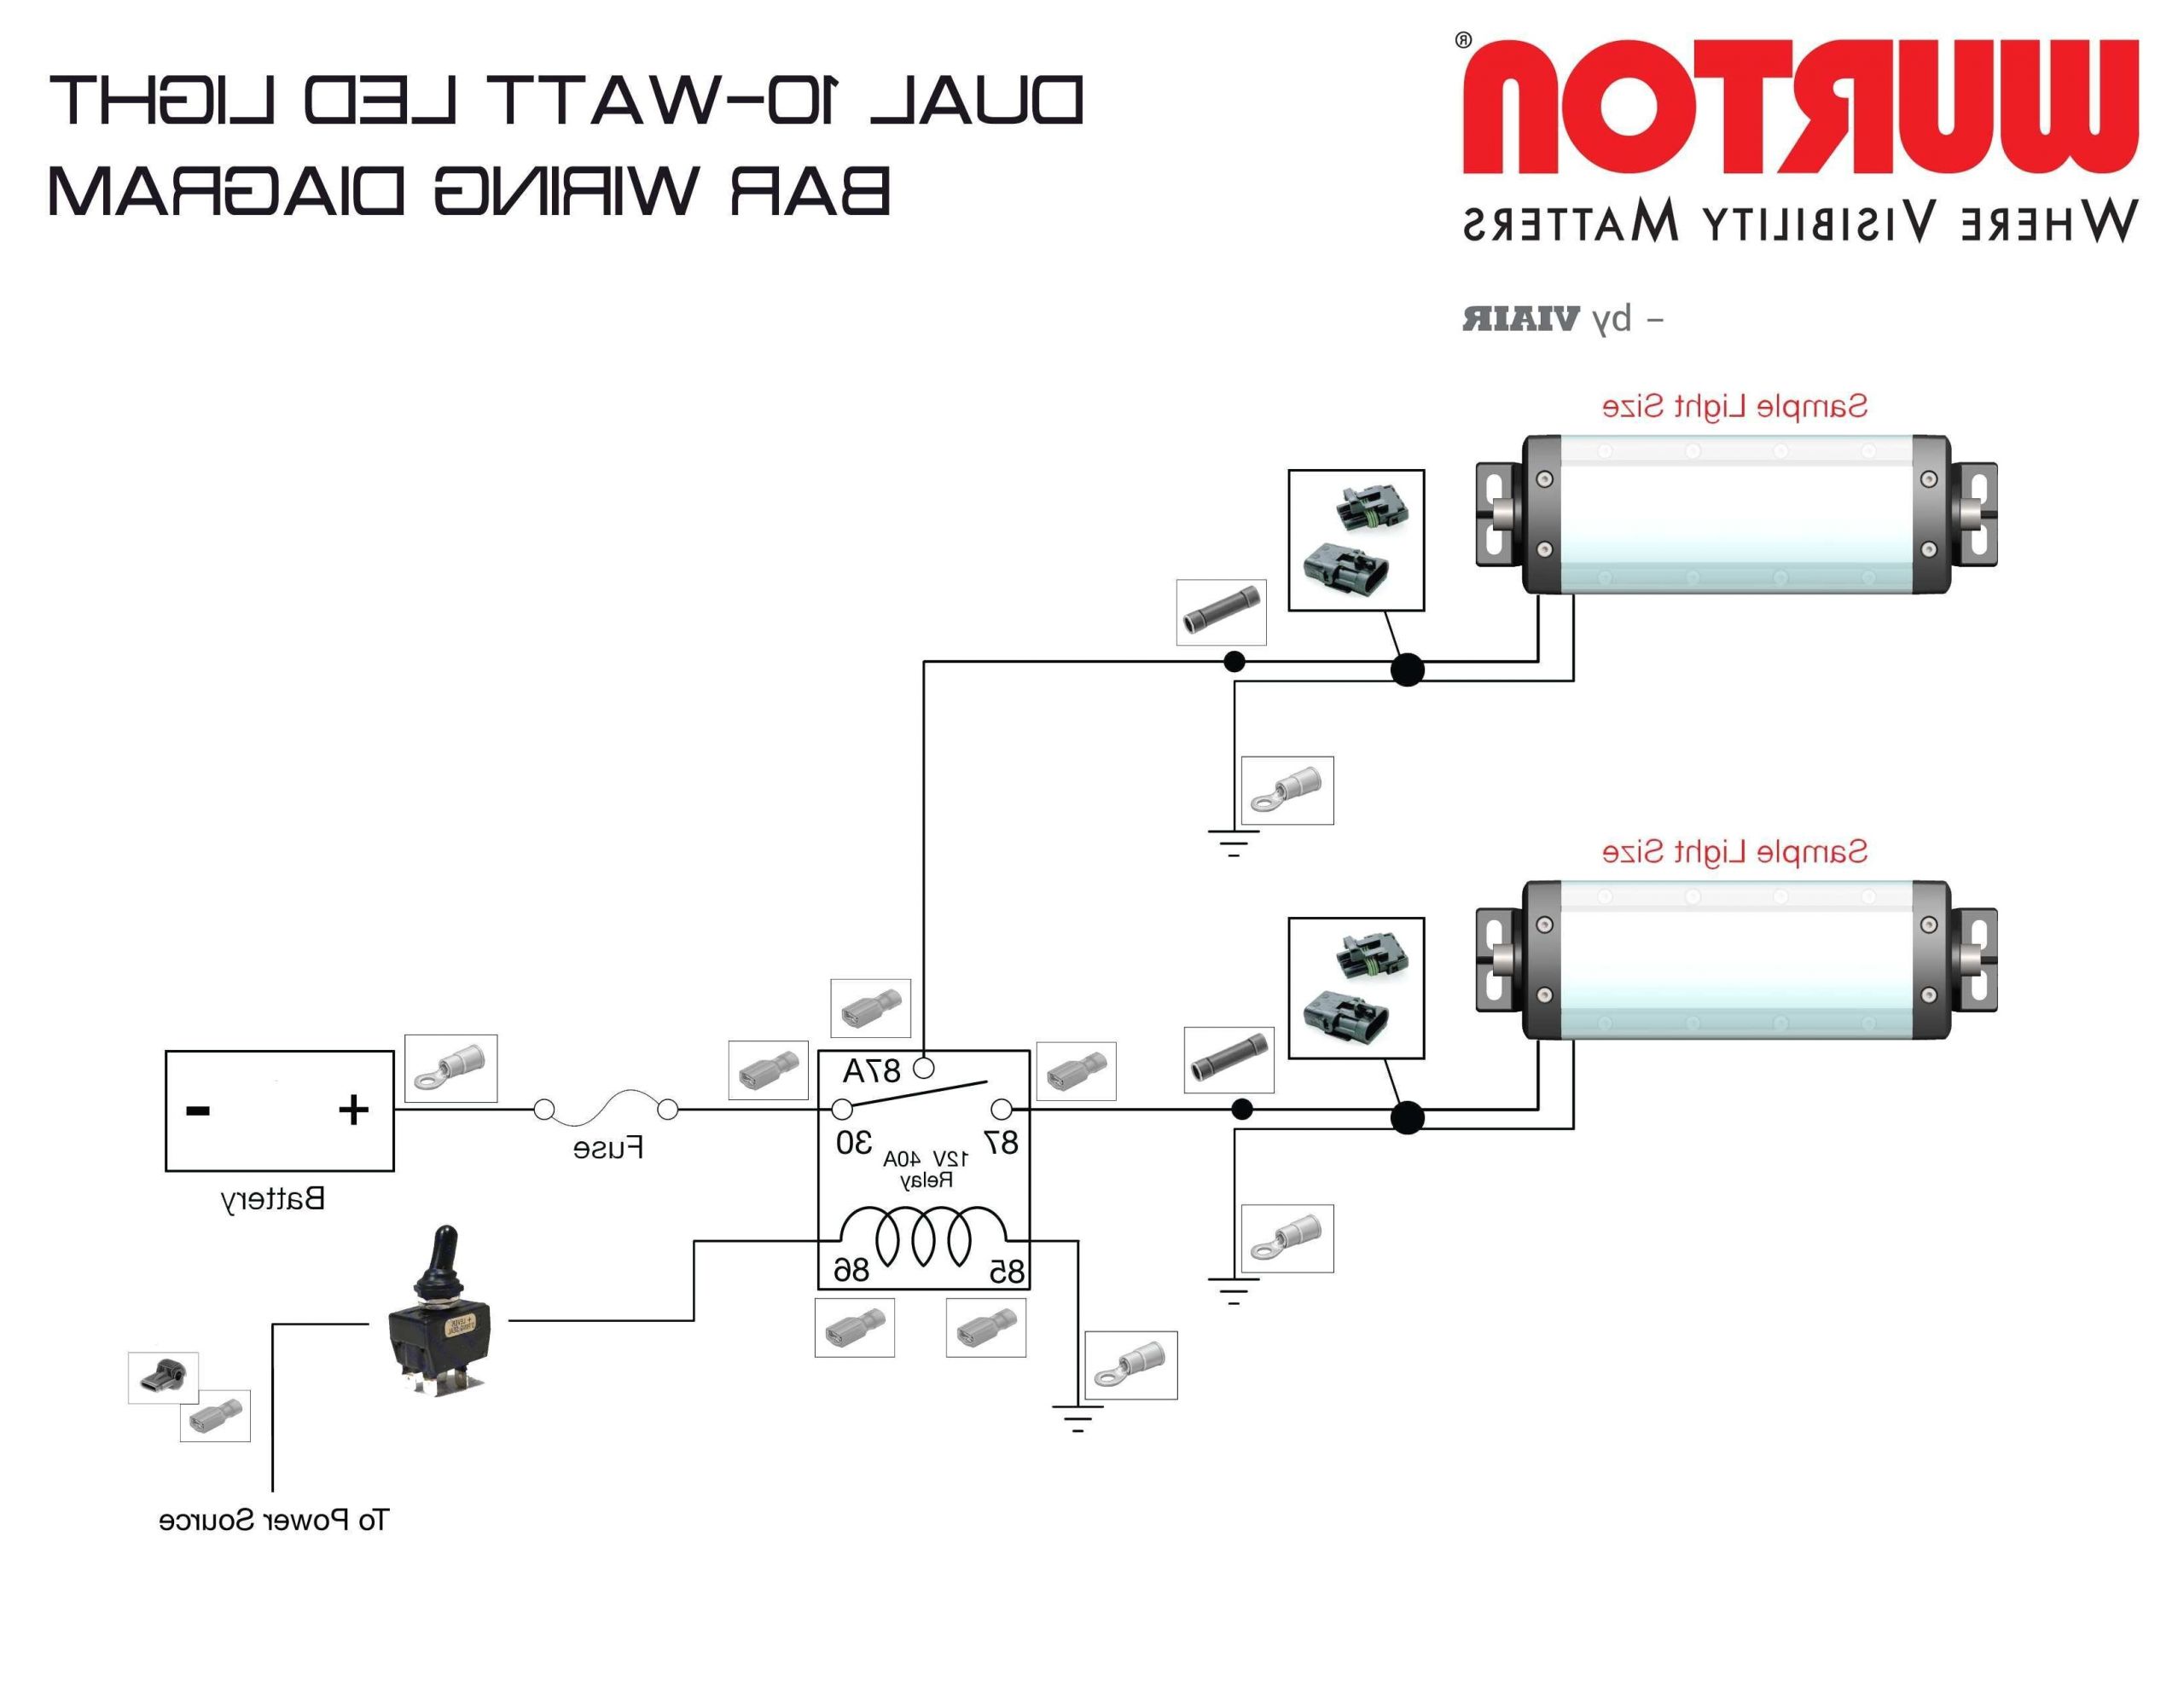 3 Wire Led Trailer Light Wiring Diagram Wiring 3 Wire Led Tail Lights Image Details 3 Wire Led